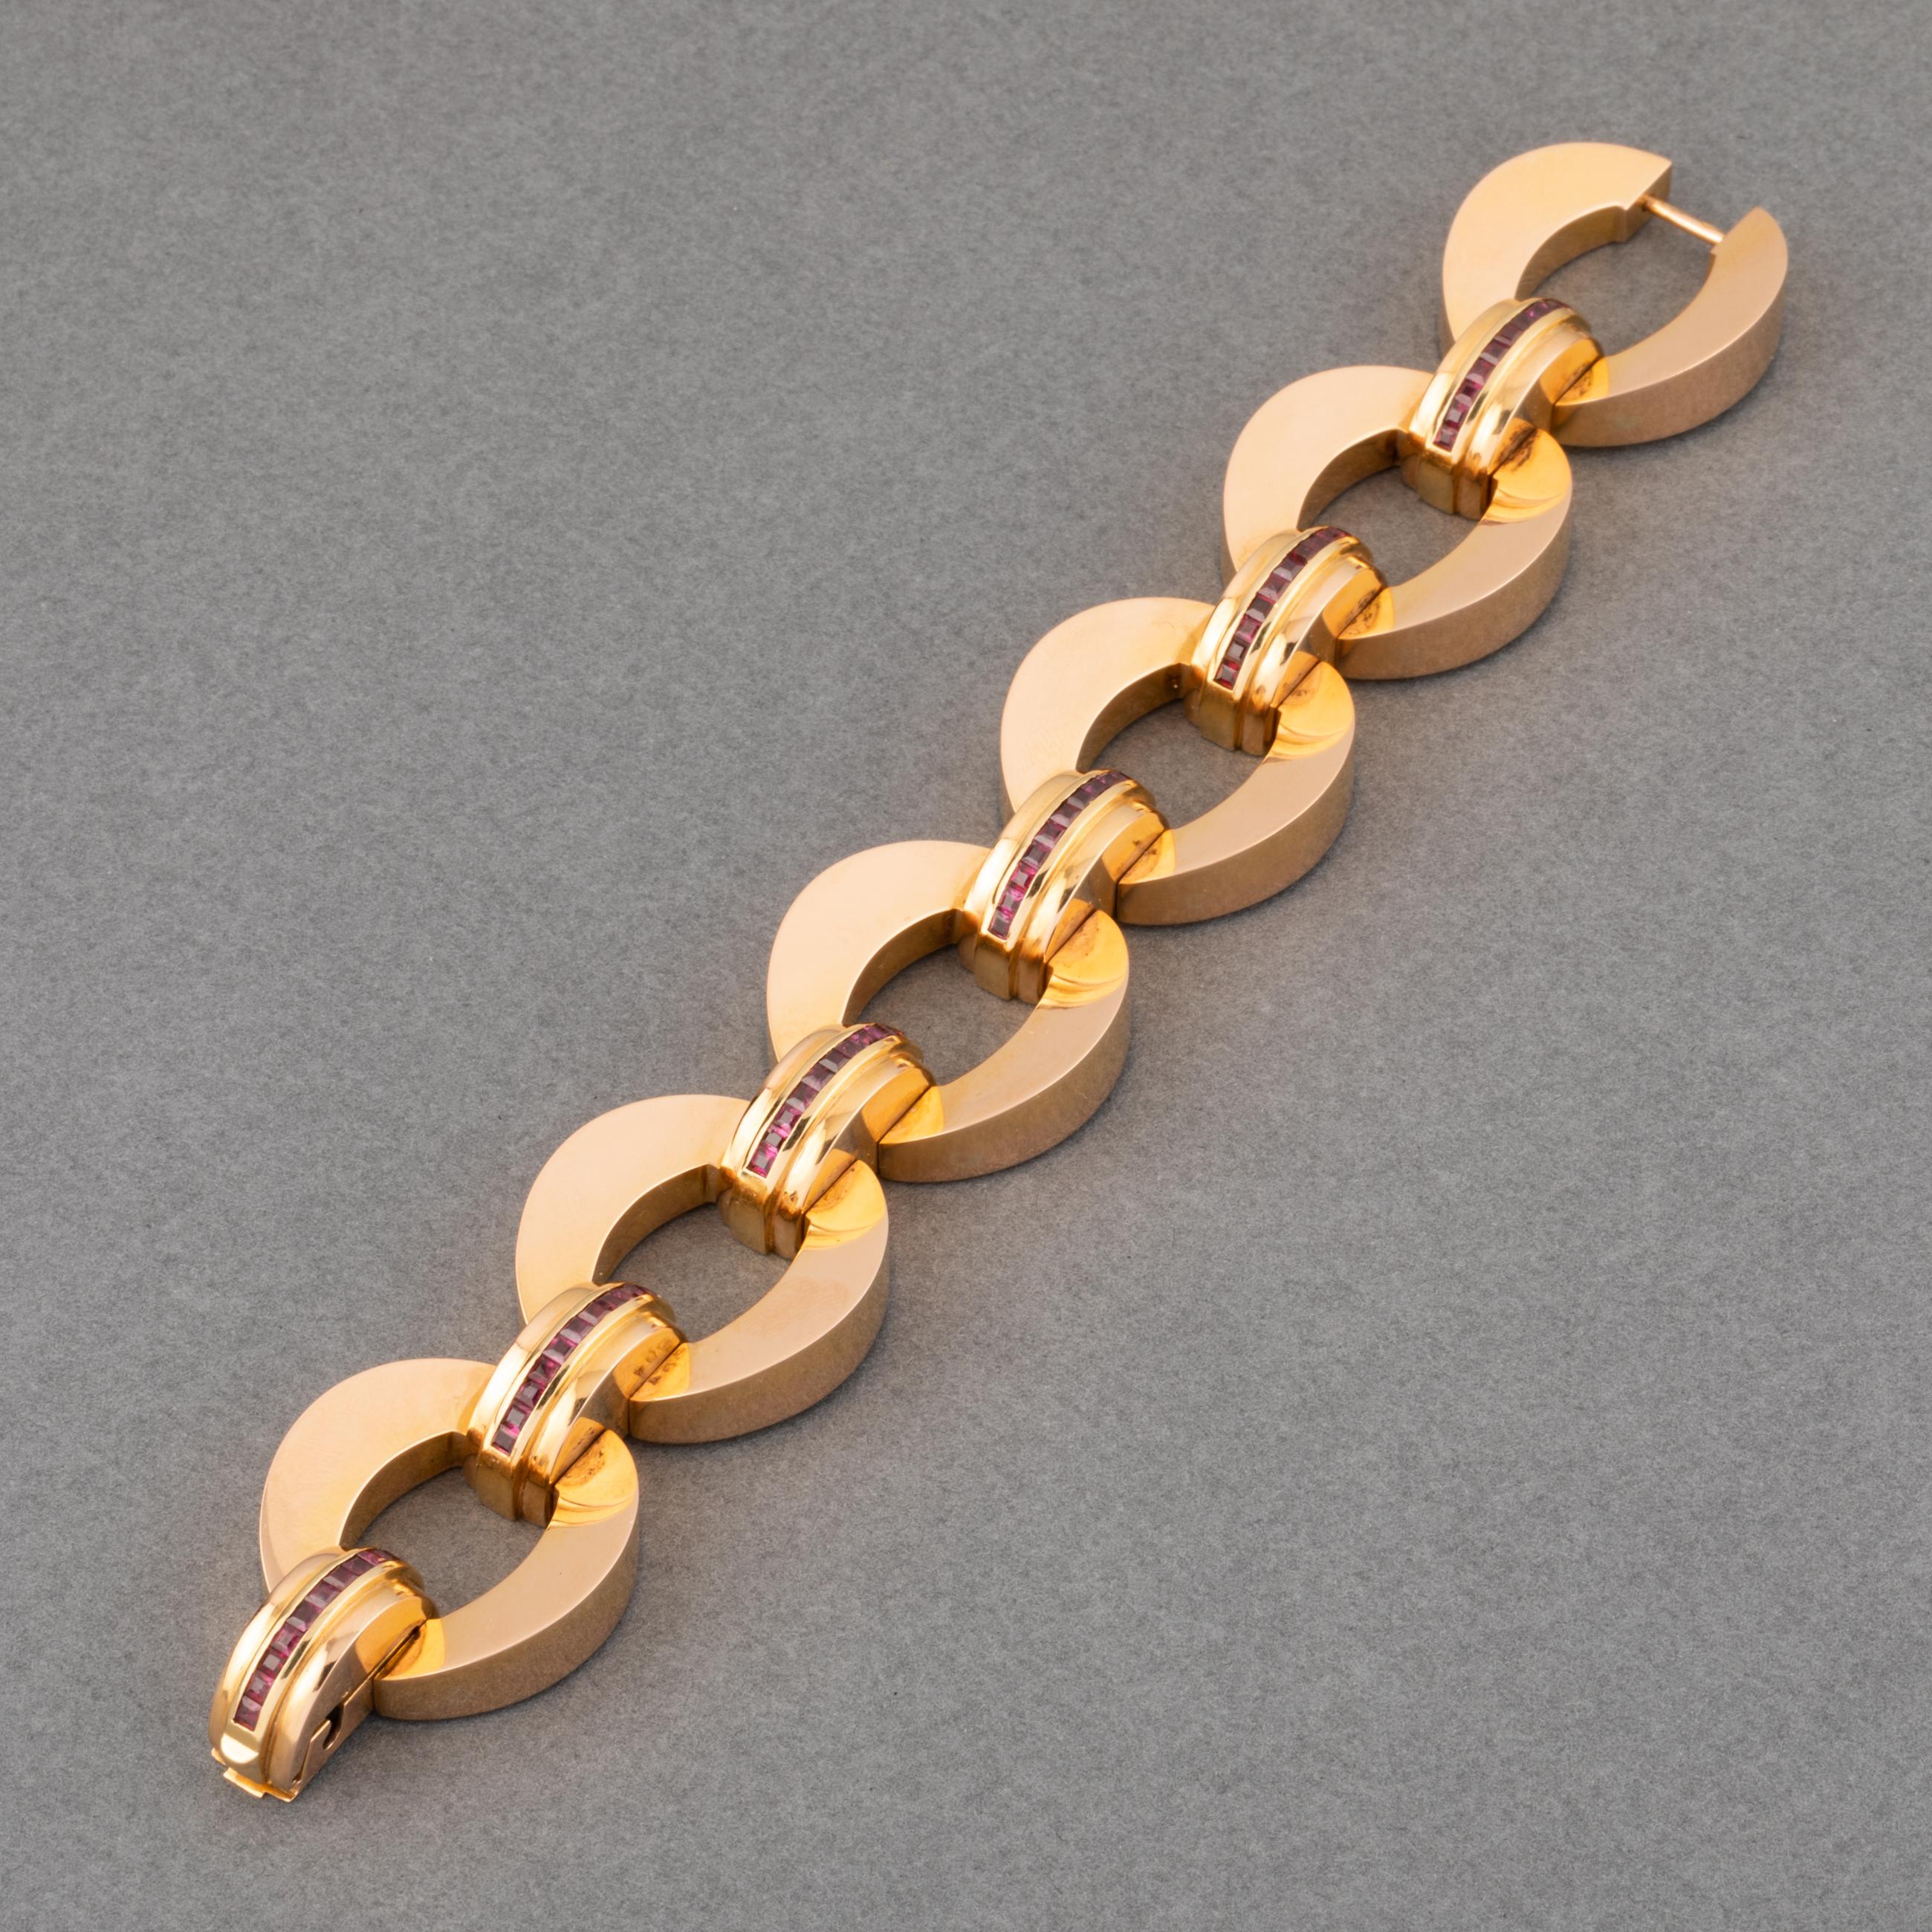 One very beautiful bracelet, made by René Boivin circa 1938/1940. From a drawing of Juliette Moutarde, the head designer.
With its certificate of authenticity.

Made in yellow gold 18k and set with natural red rubies.
Total weight: 92.60 grams.
For